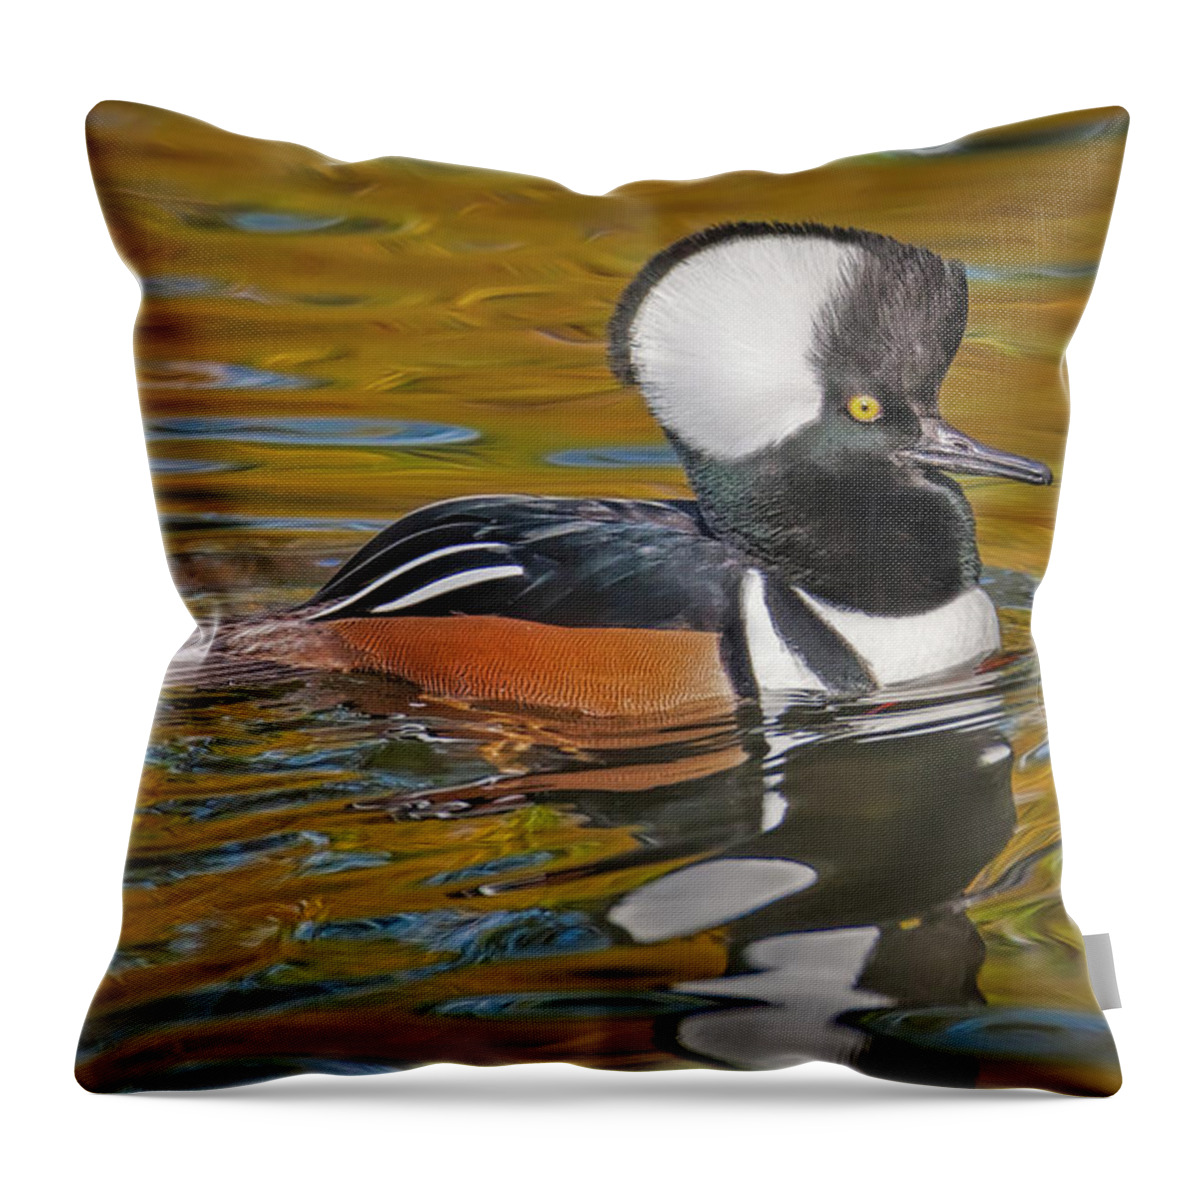 Hooded Merganaser Throw Pillow featuring the photograph Male Hooded Merganser Duck by Susan Candelario